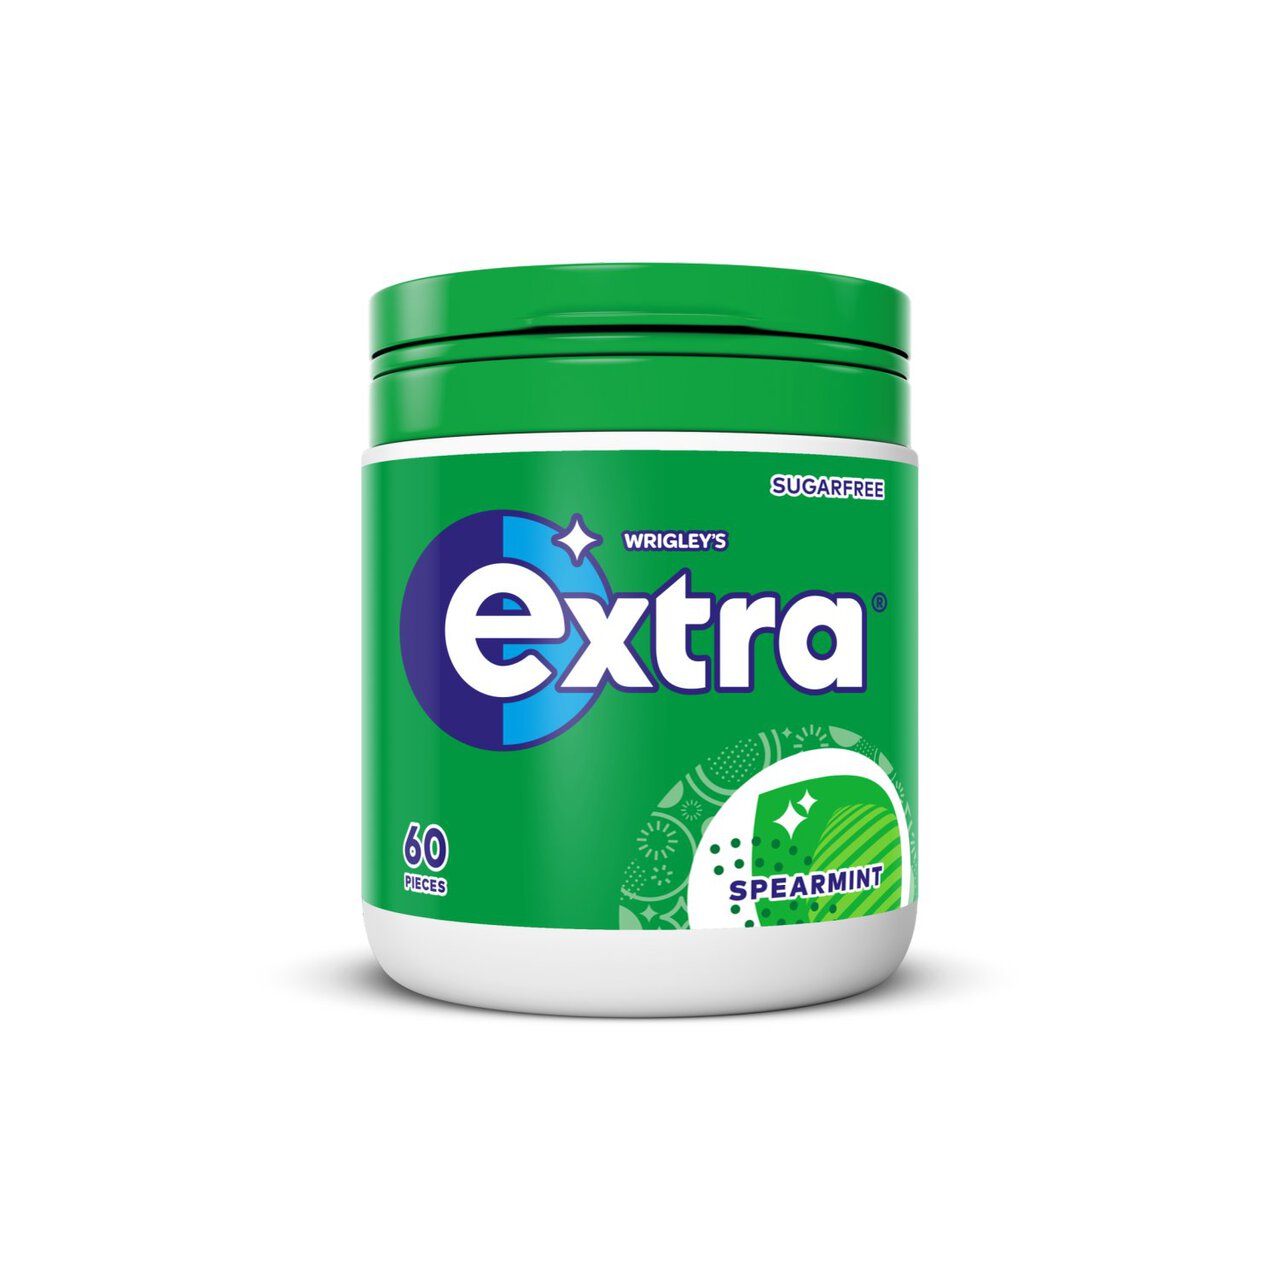 Extra Spearmint Sugarfree Chewing Gum Bottle 60 Pieces 60 per pack